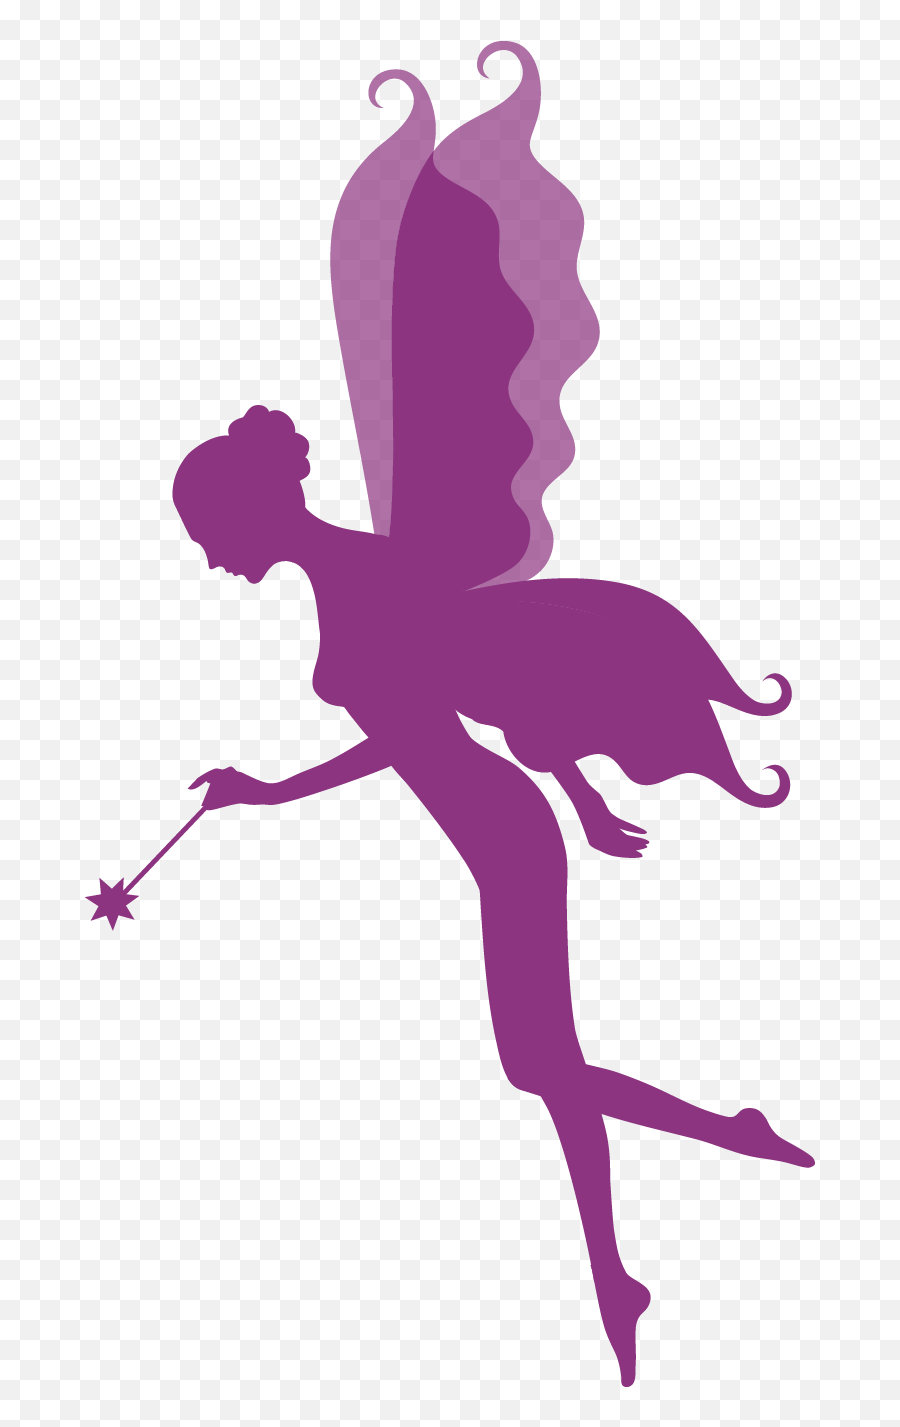 Services - The Compliance Fairies Png,Fairy Icon